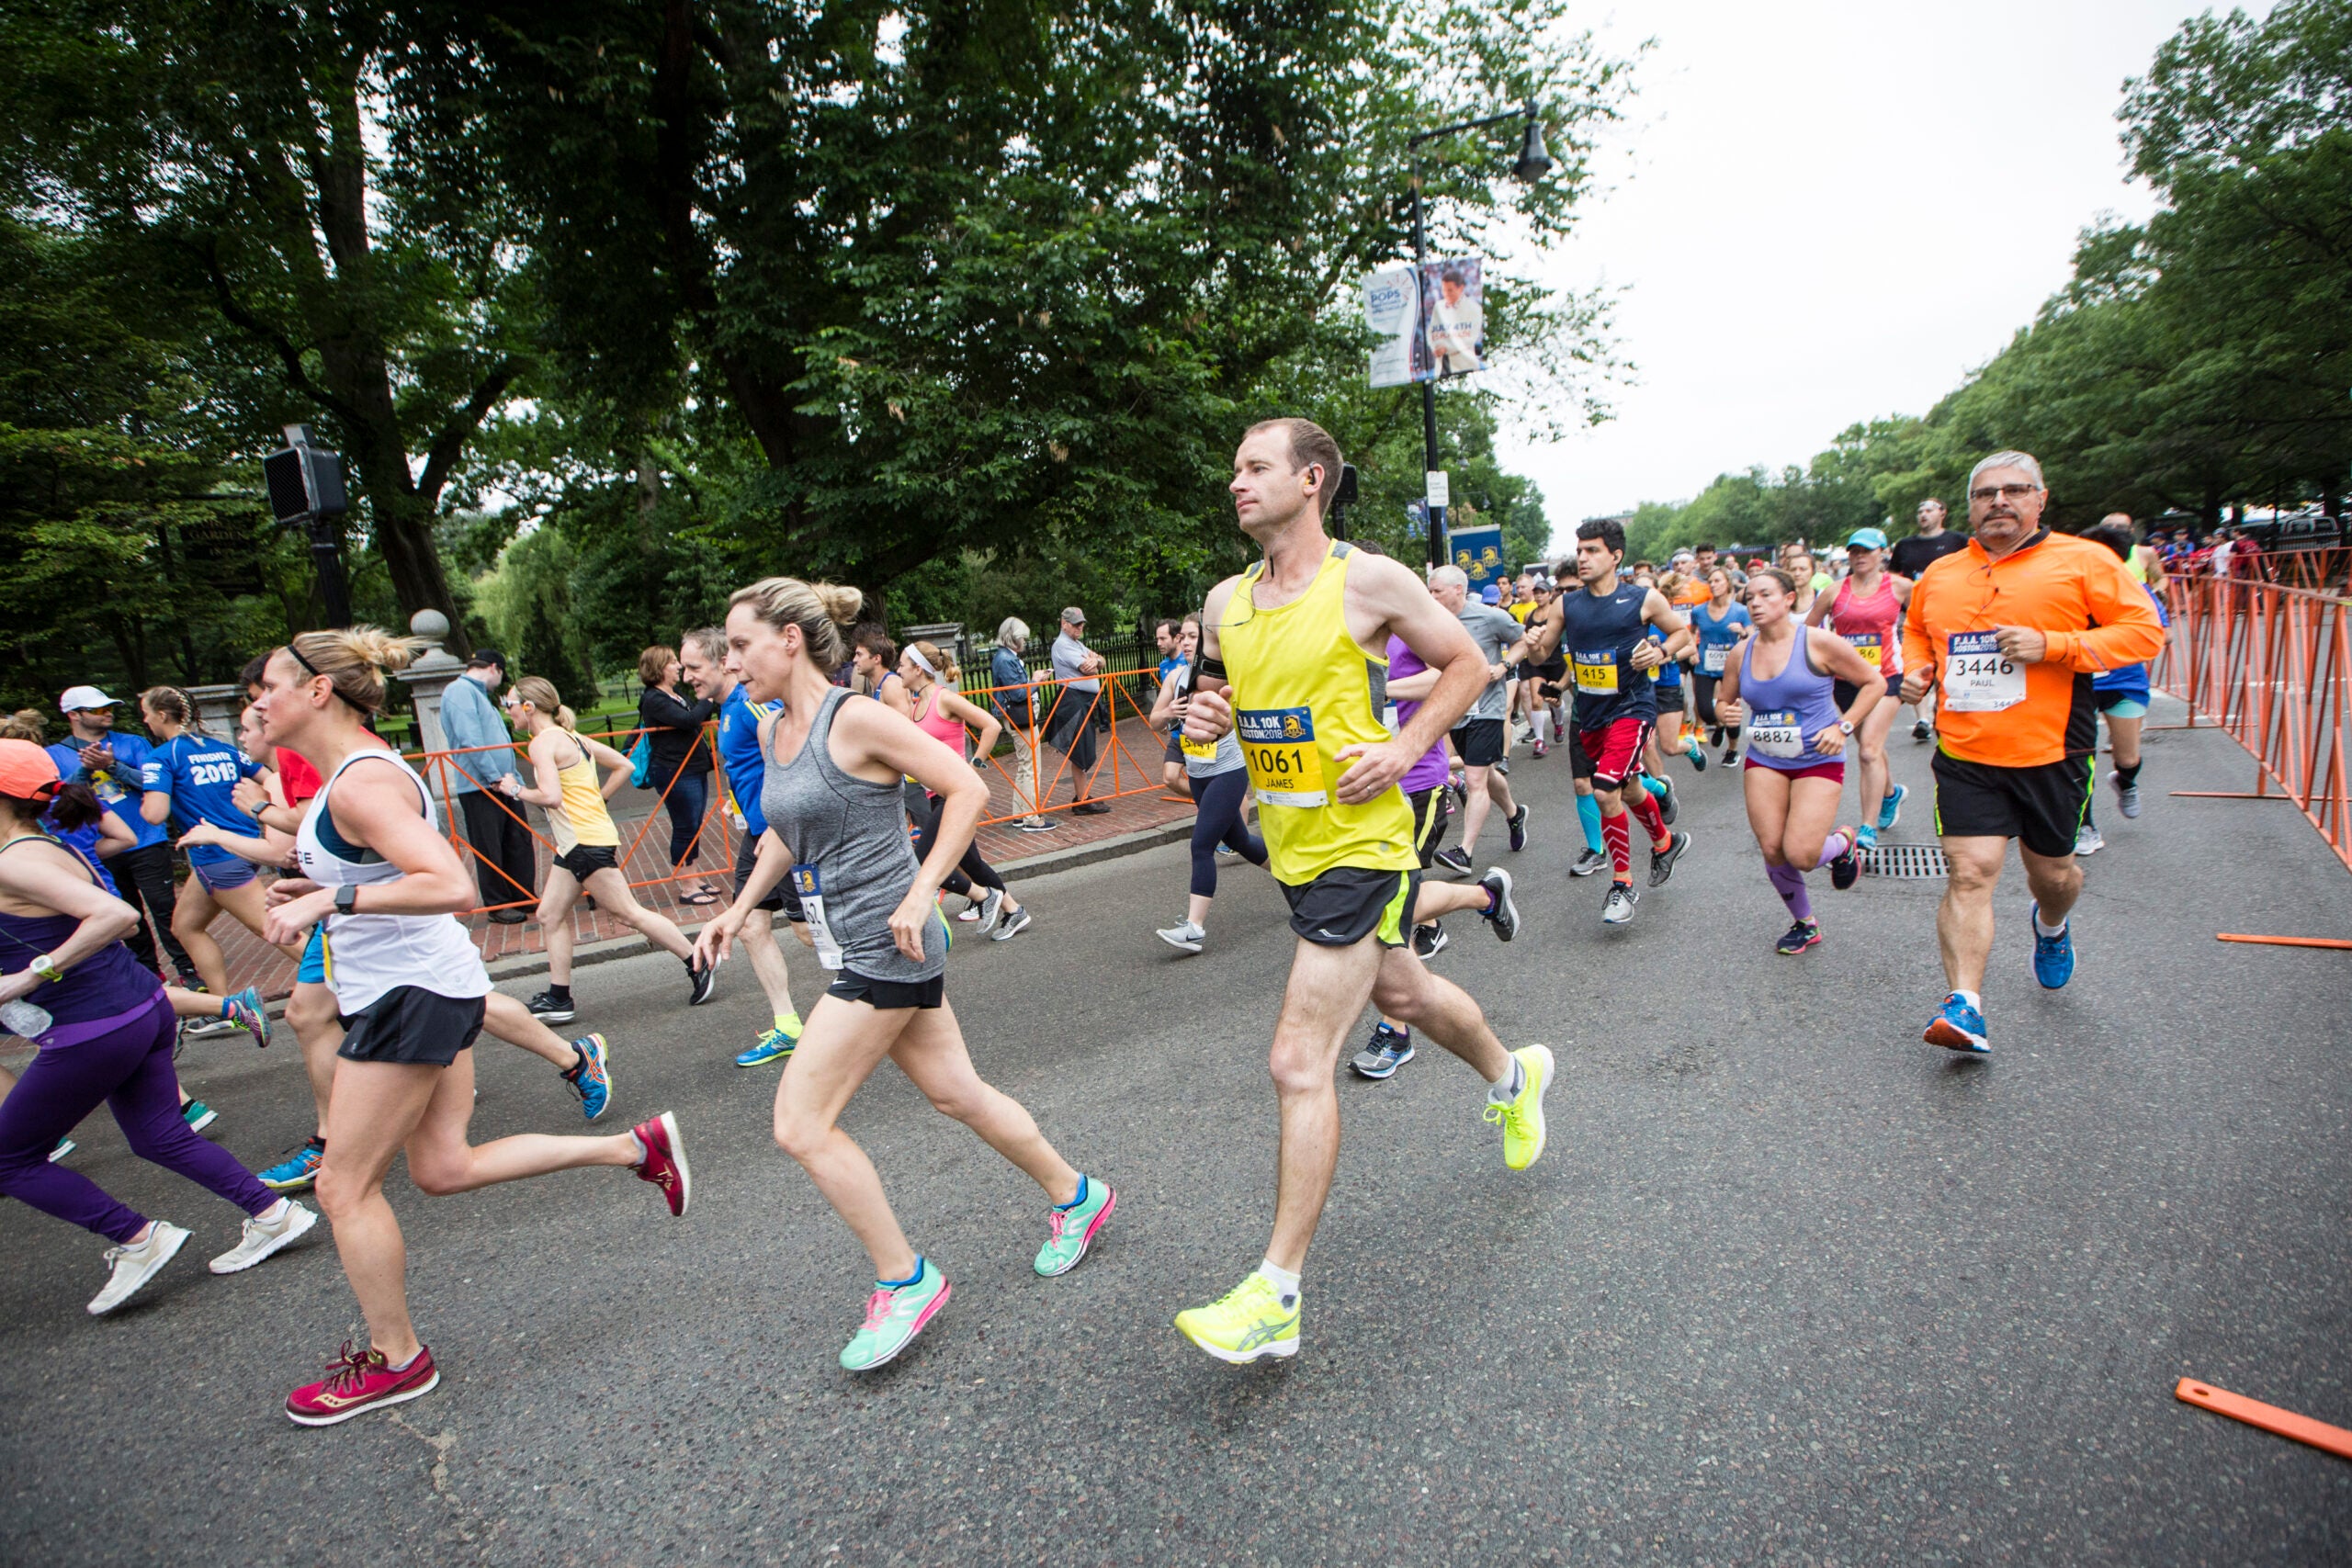 Massachusetts runners are the fastest in the country, according to a